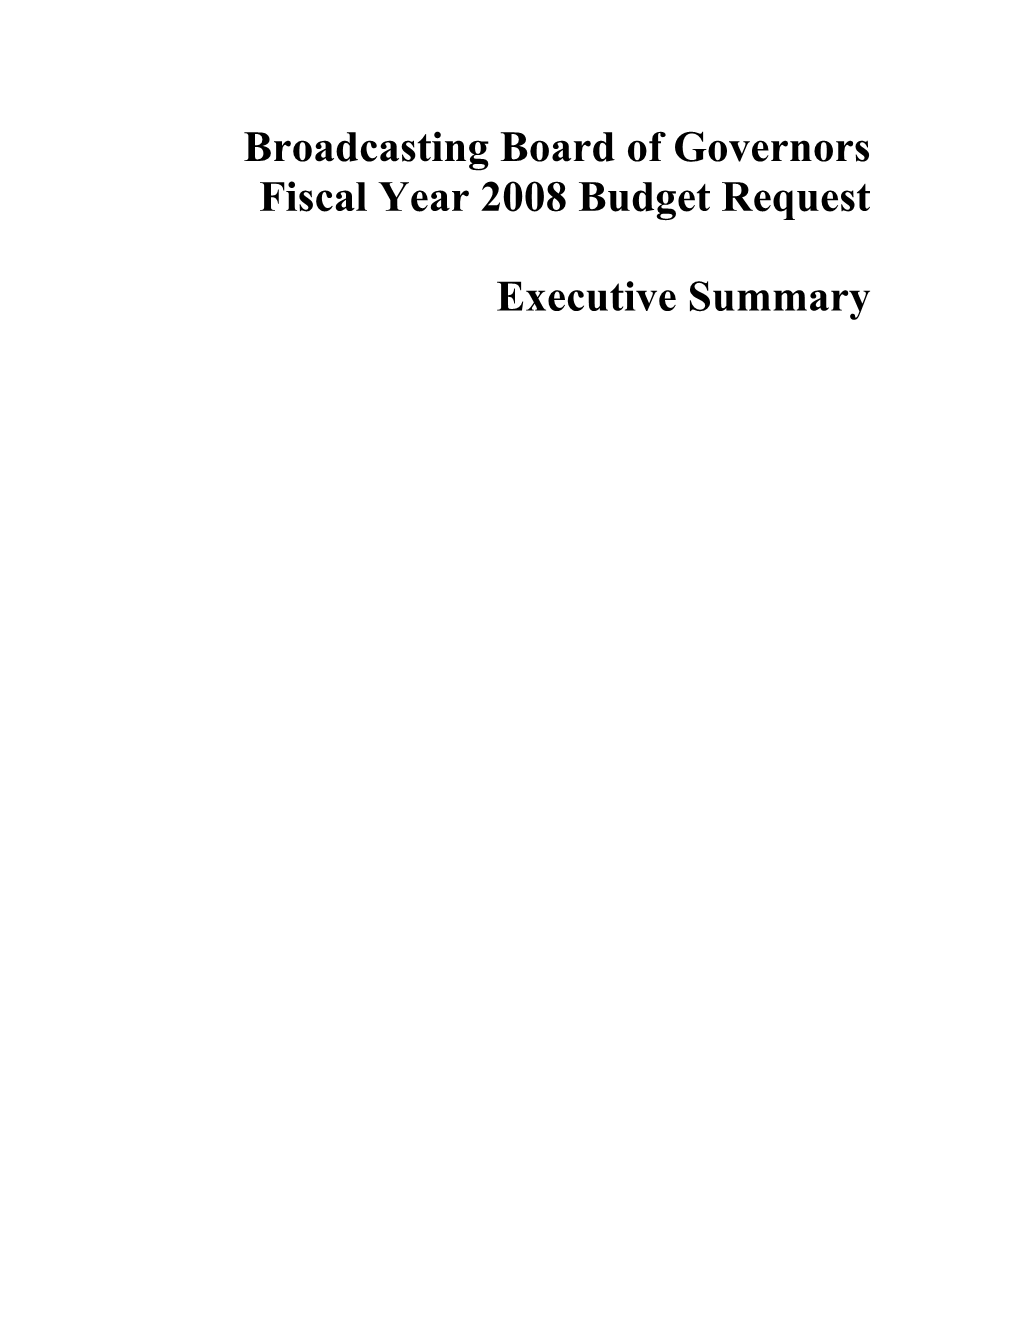 Broadcasting Board of Governors Fiscal Year 2008 Budget Request